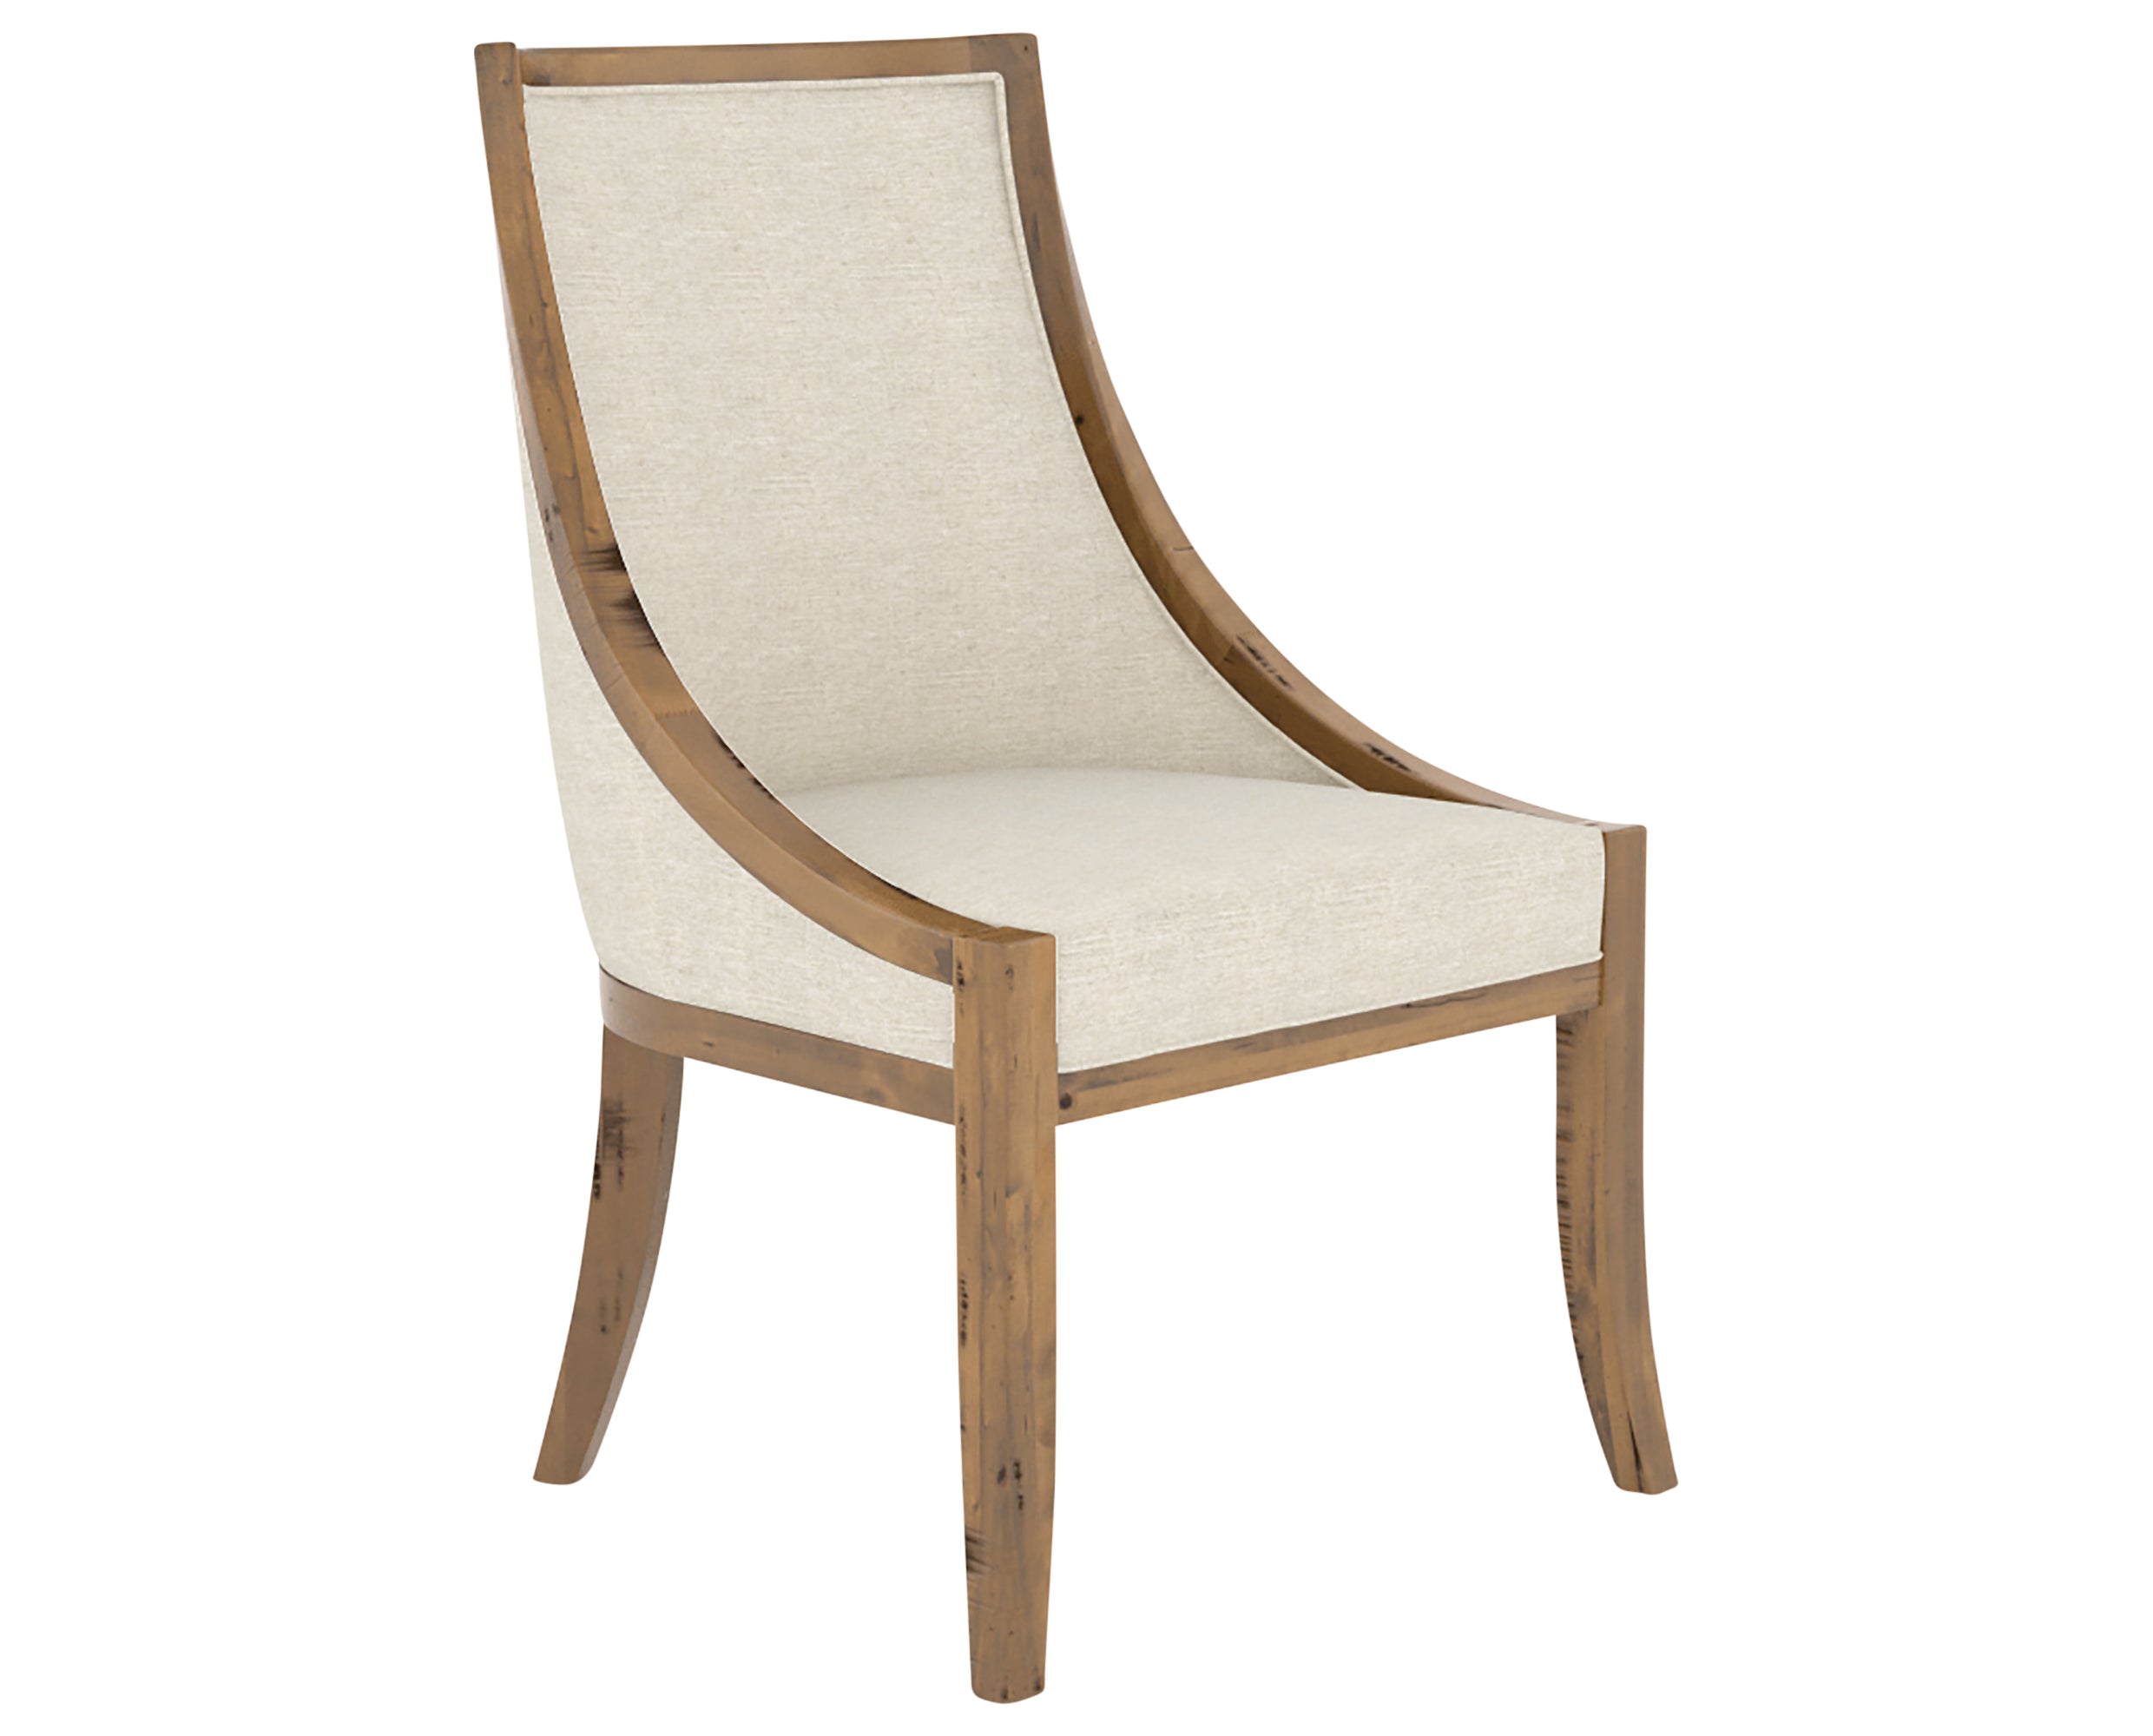 Oak Washed and Fabric TW | Canadel Champlain Dining Chair 319 | Valley Ridge Furniture